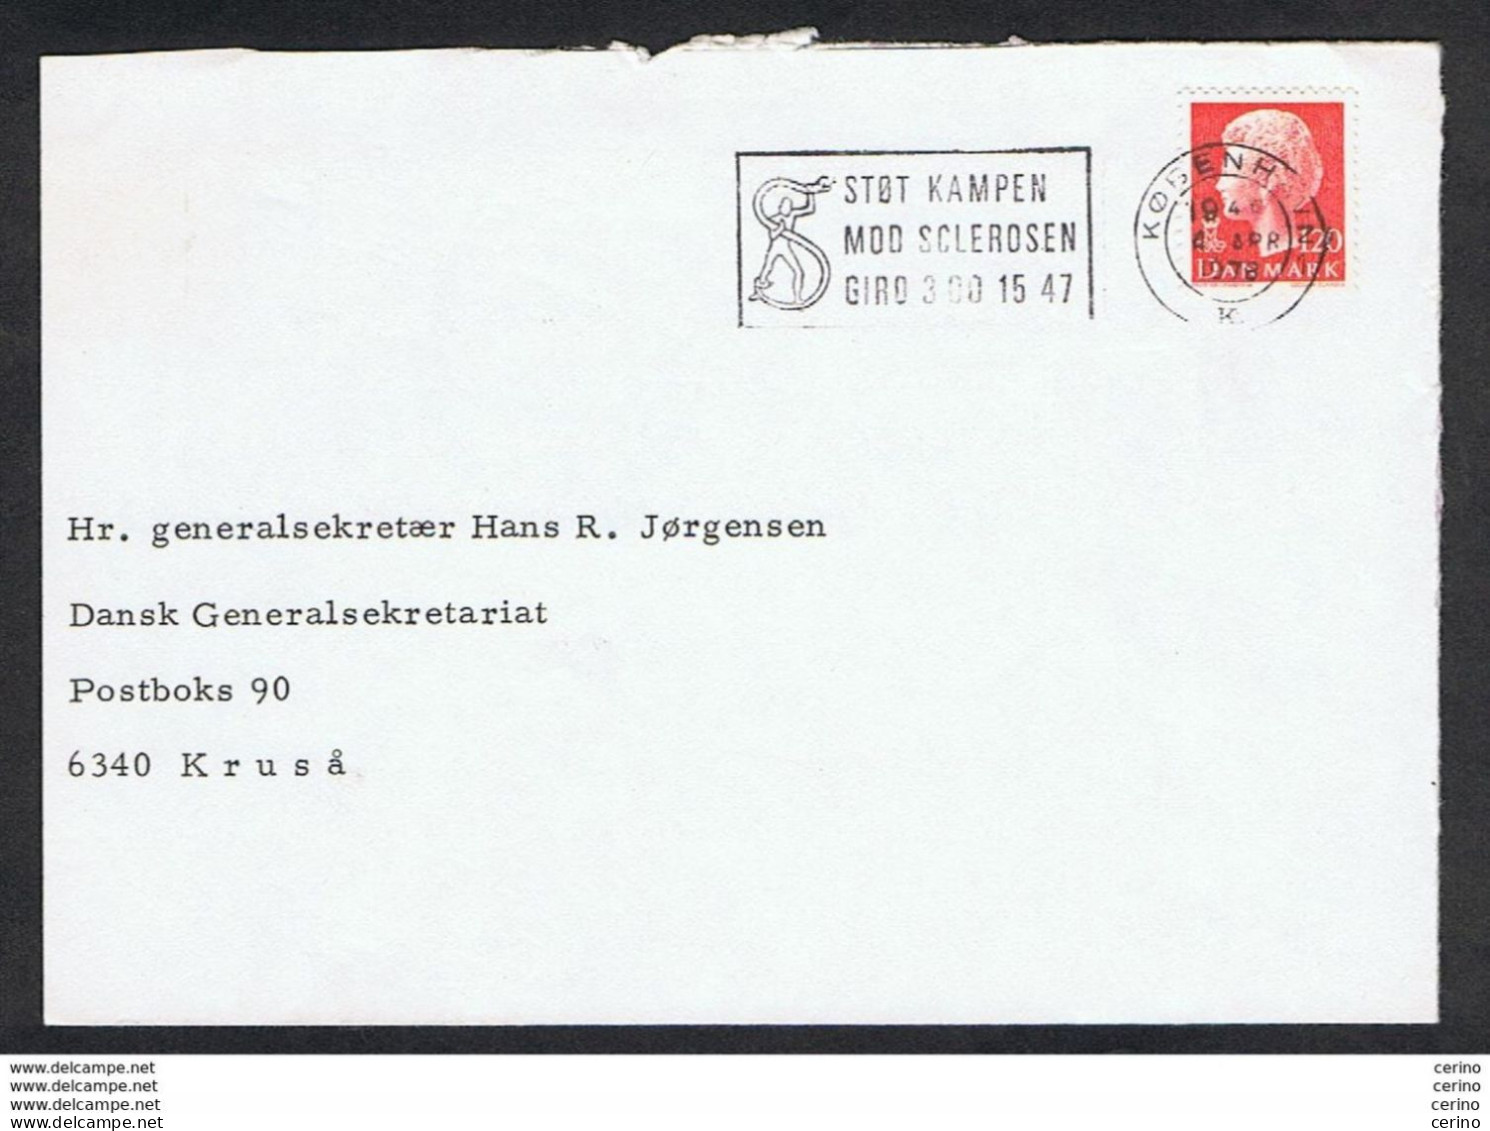 DENMARK: 1978 COVERT OPEN ON 3 SIDES WITH 120 Ore RED (651) - TO KRUSA - Covers & Documents